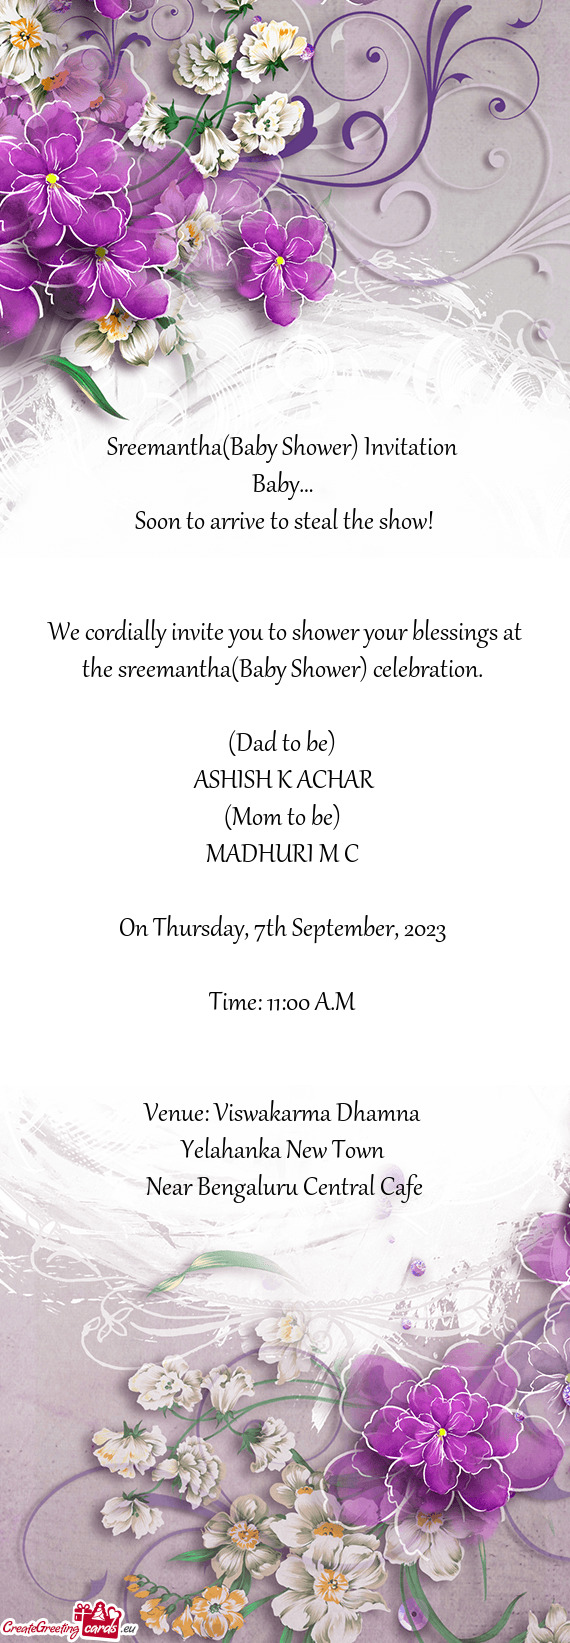 We cordially invite you to shower your blessings at the sreemantha(Baby Shower) celebration